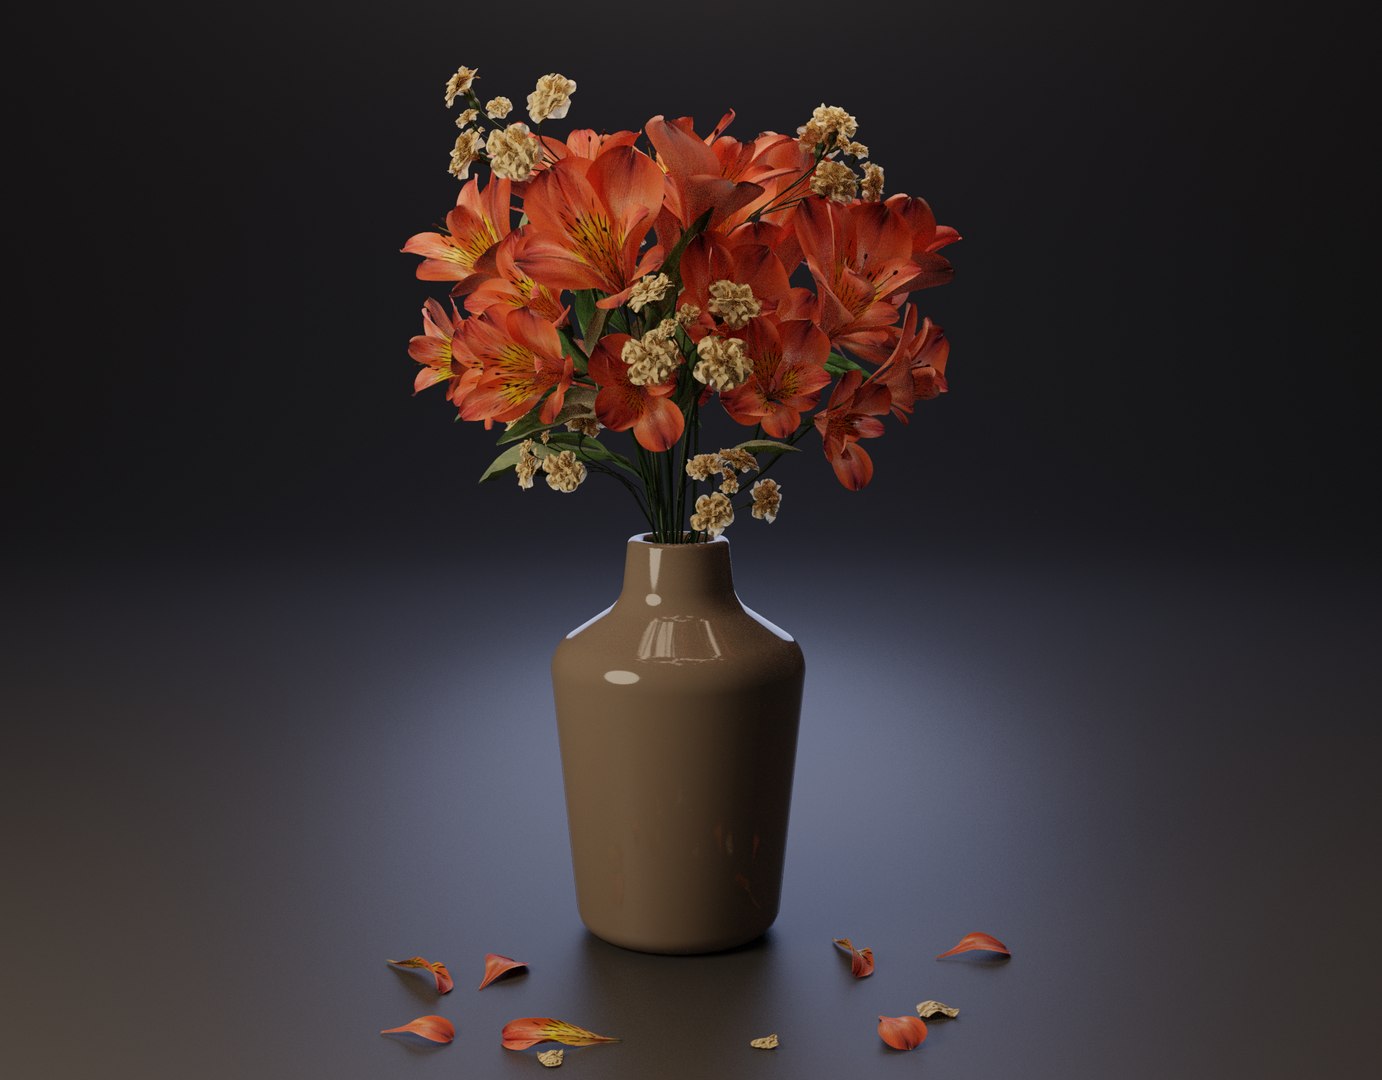 3,446 Modeling Clay Flower Images, Stock Photos, 3D objects